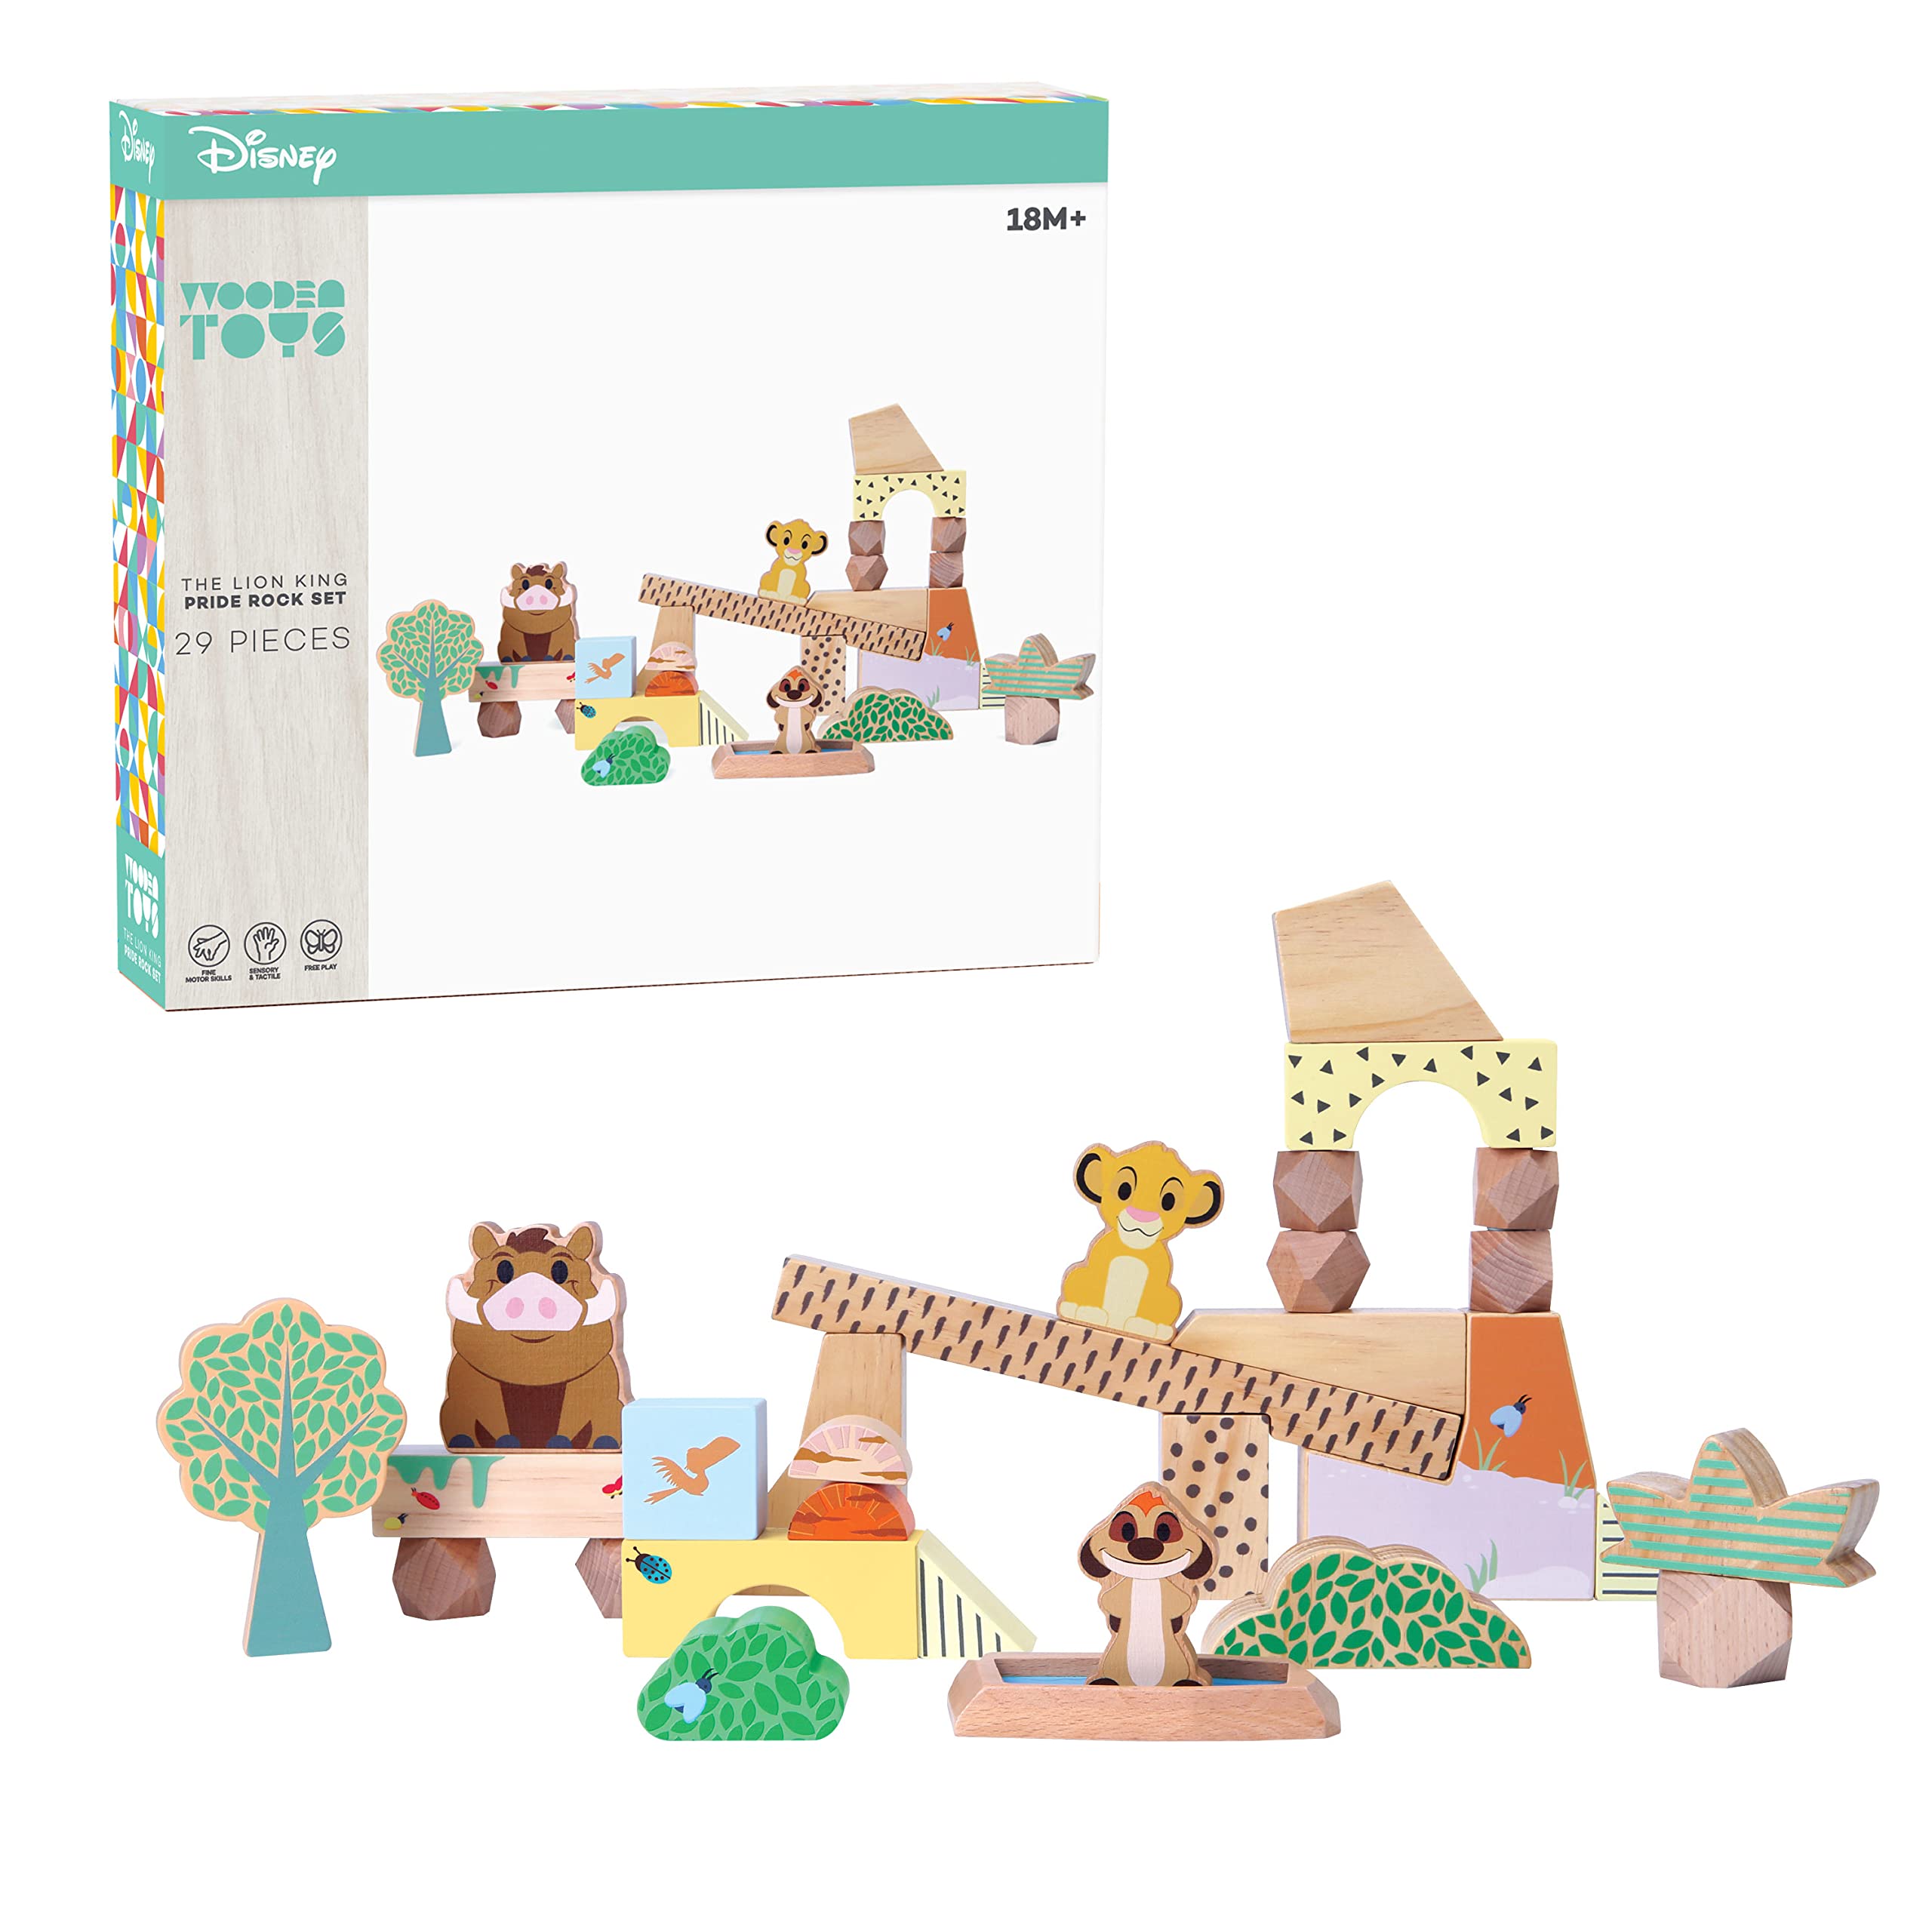 Disney Wooden Toys The Lion King Pride Rock Building Blocks Set, Officially Licensed Kids Toys for Ages 18 Month, Gifts and Presents by Just Play